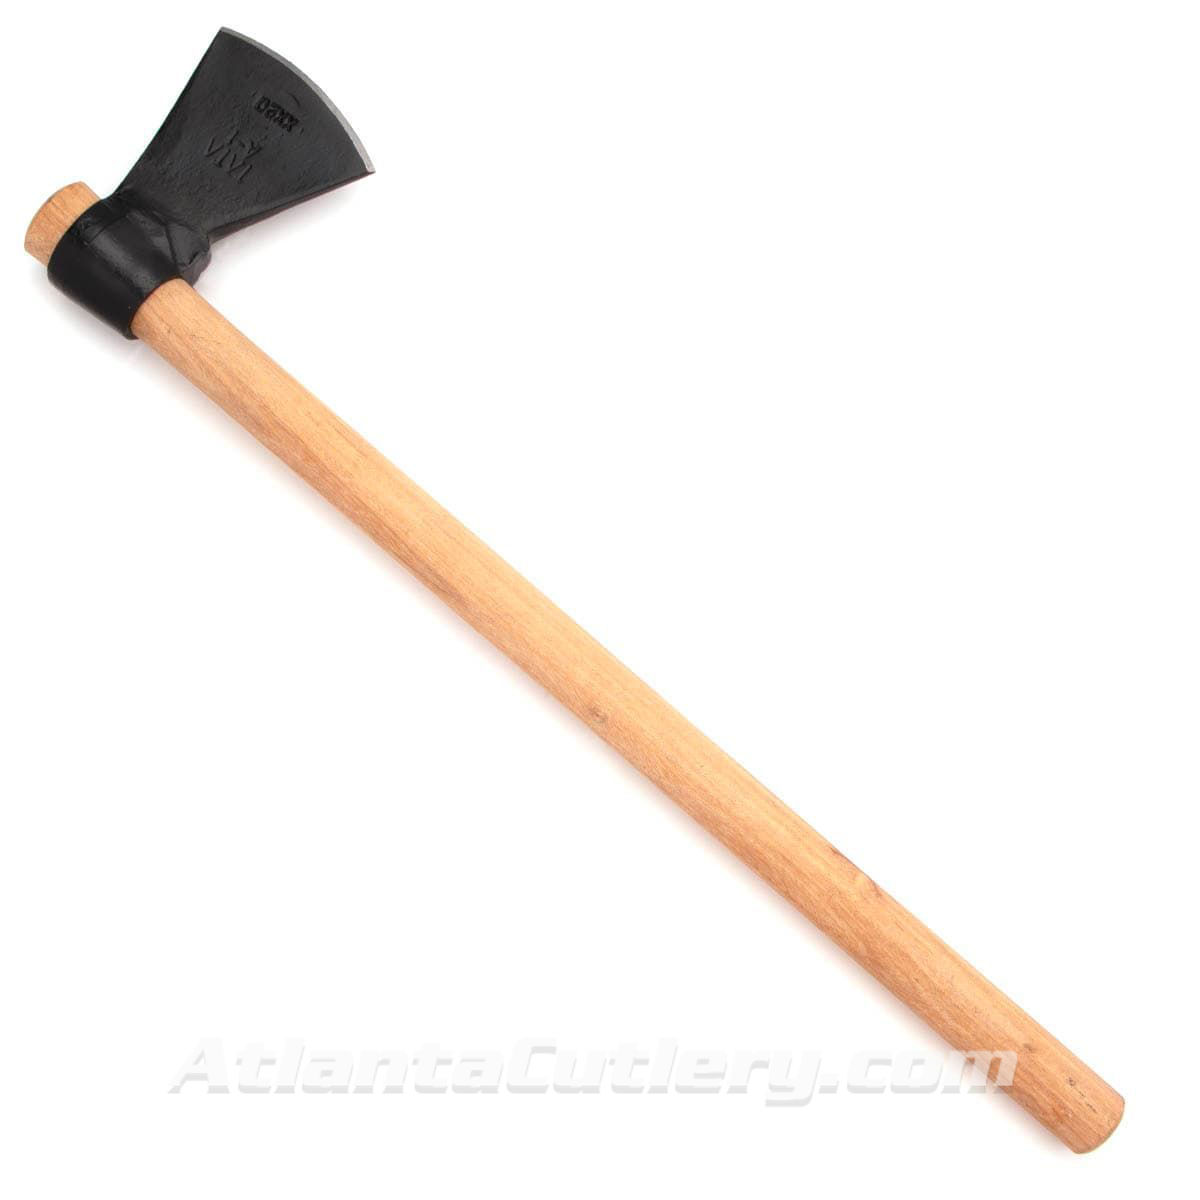 Tata Agrico Extra Short Handle Felling Axe with Drop forged 1055 high carbon steel blade and American hickory handle